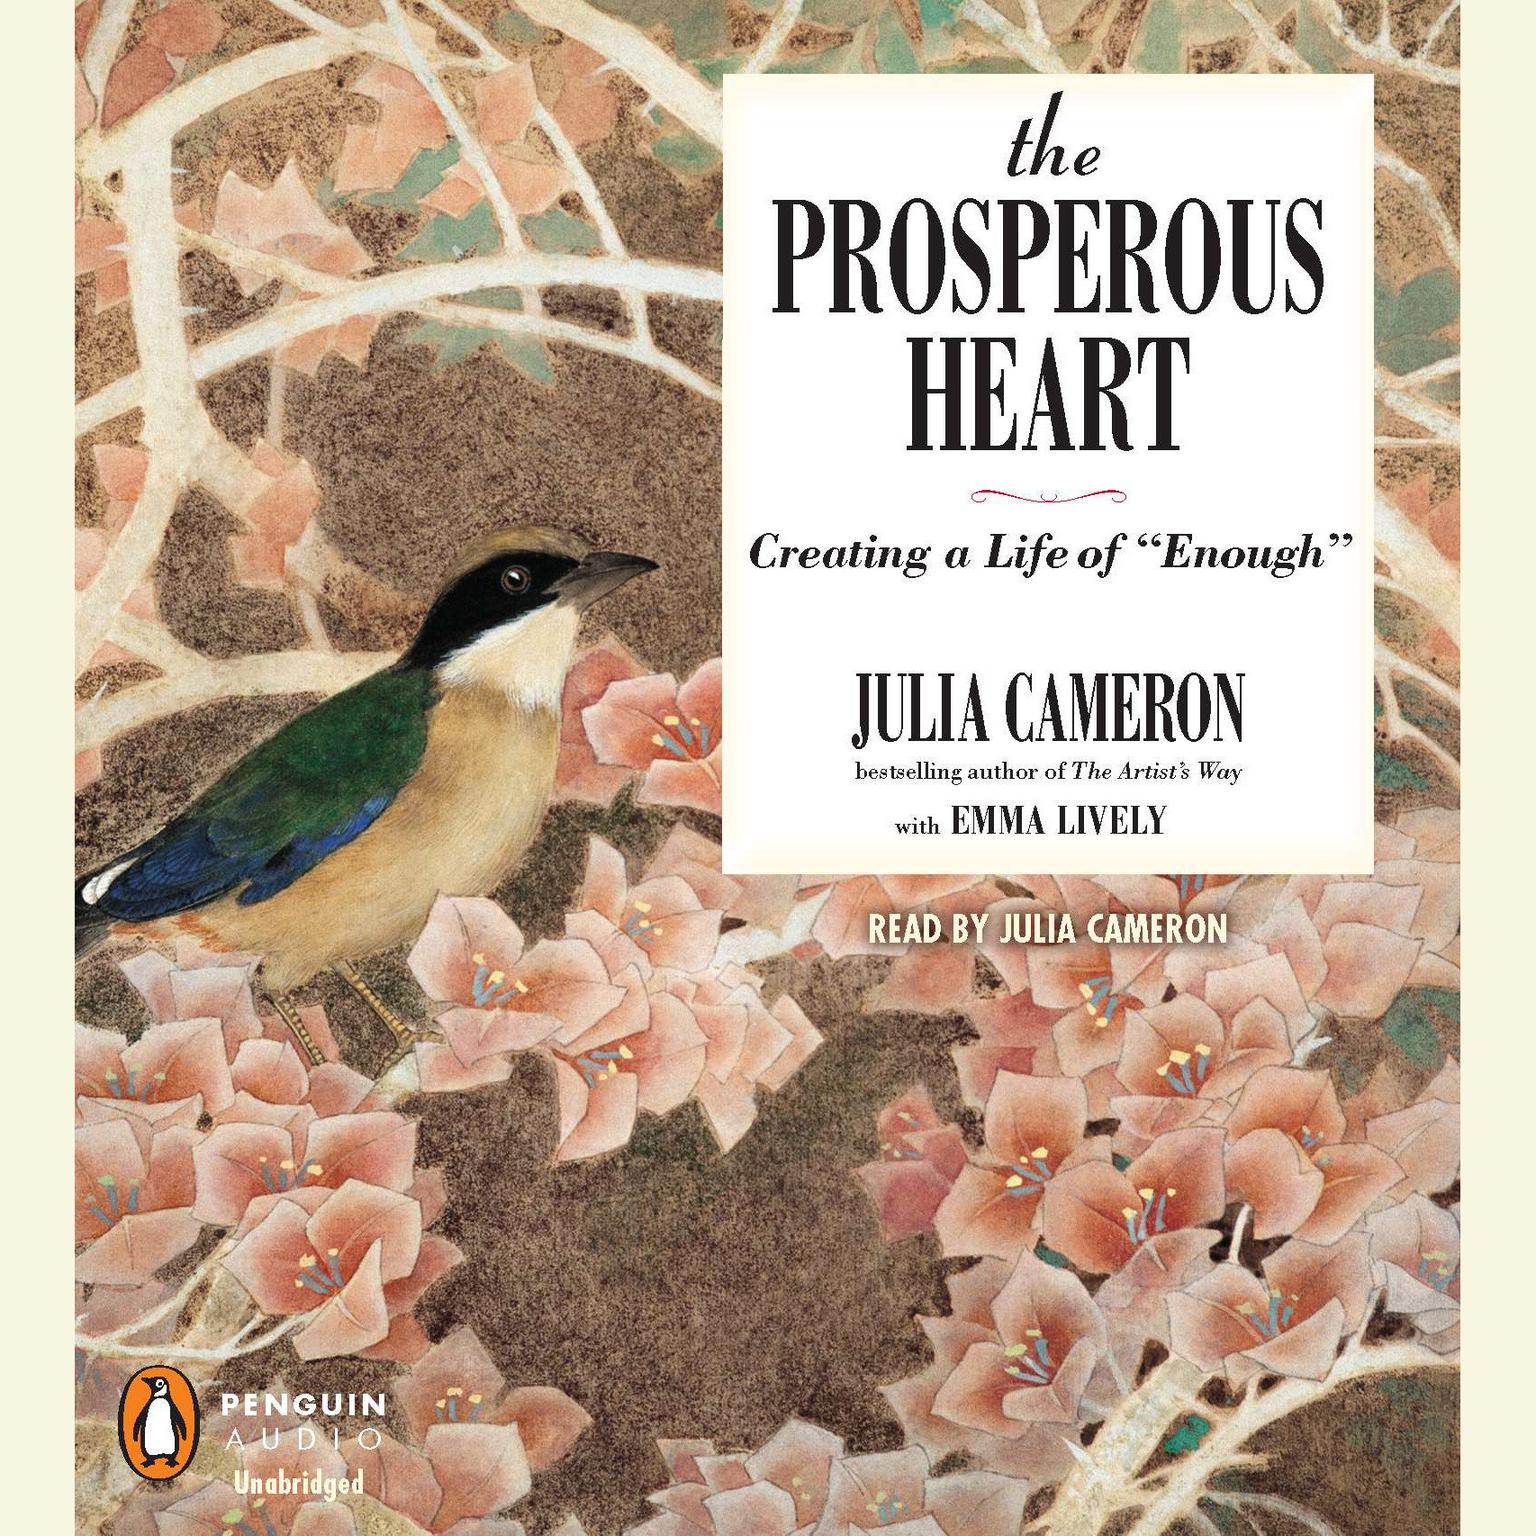 The Prosperous Heart: Creating a Life of “Enough” Audiobook, by Julia Cameron